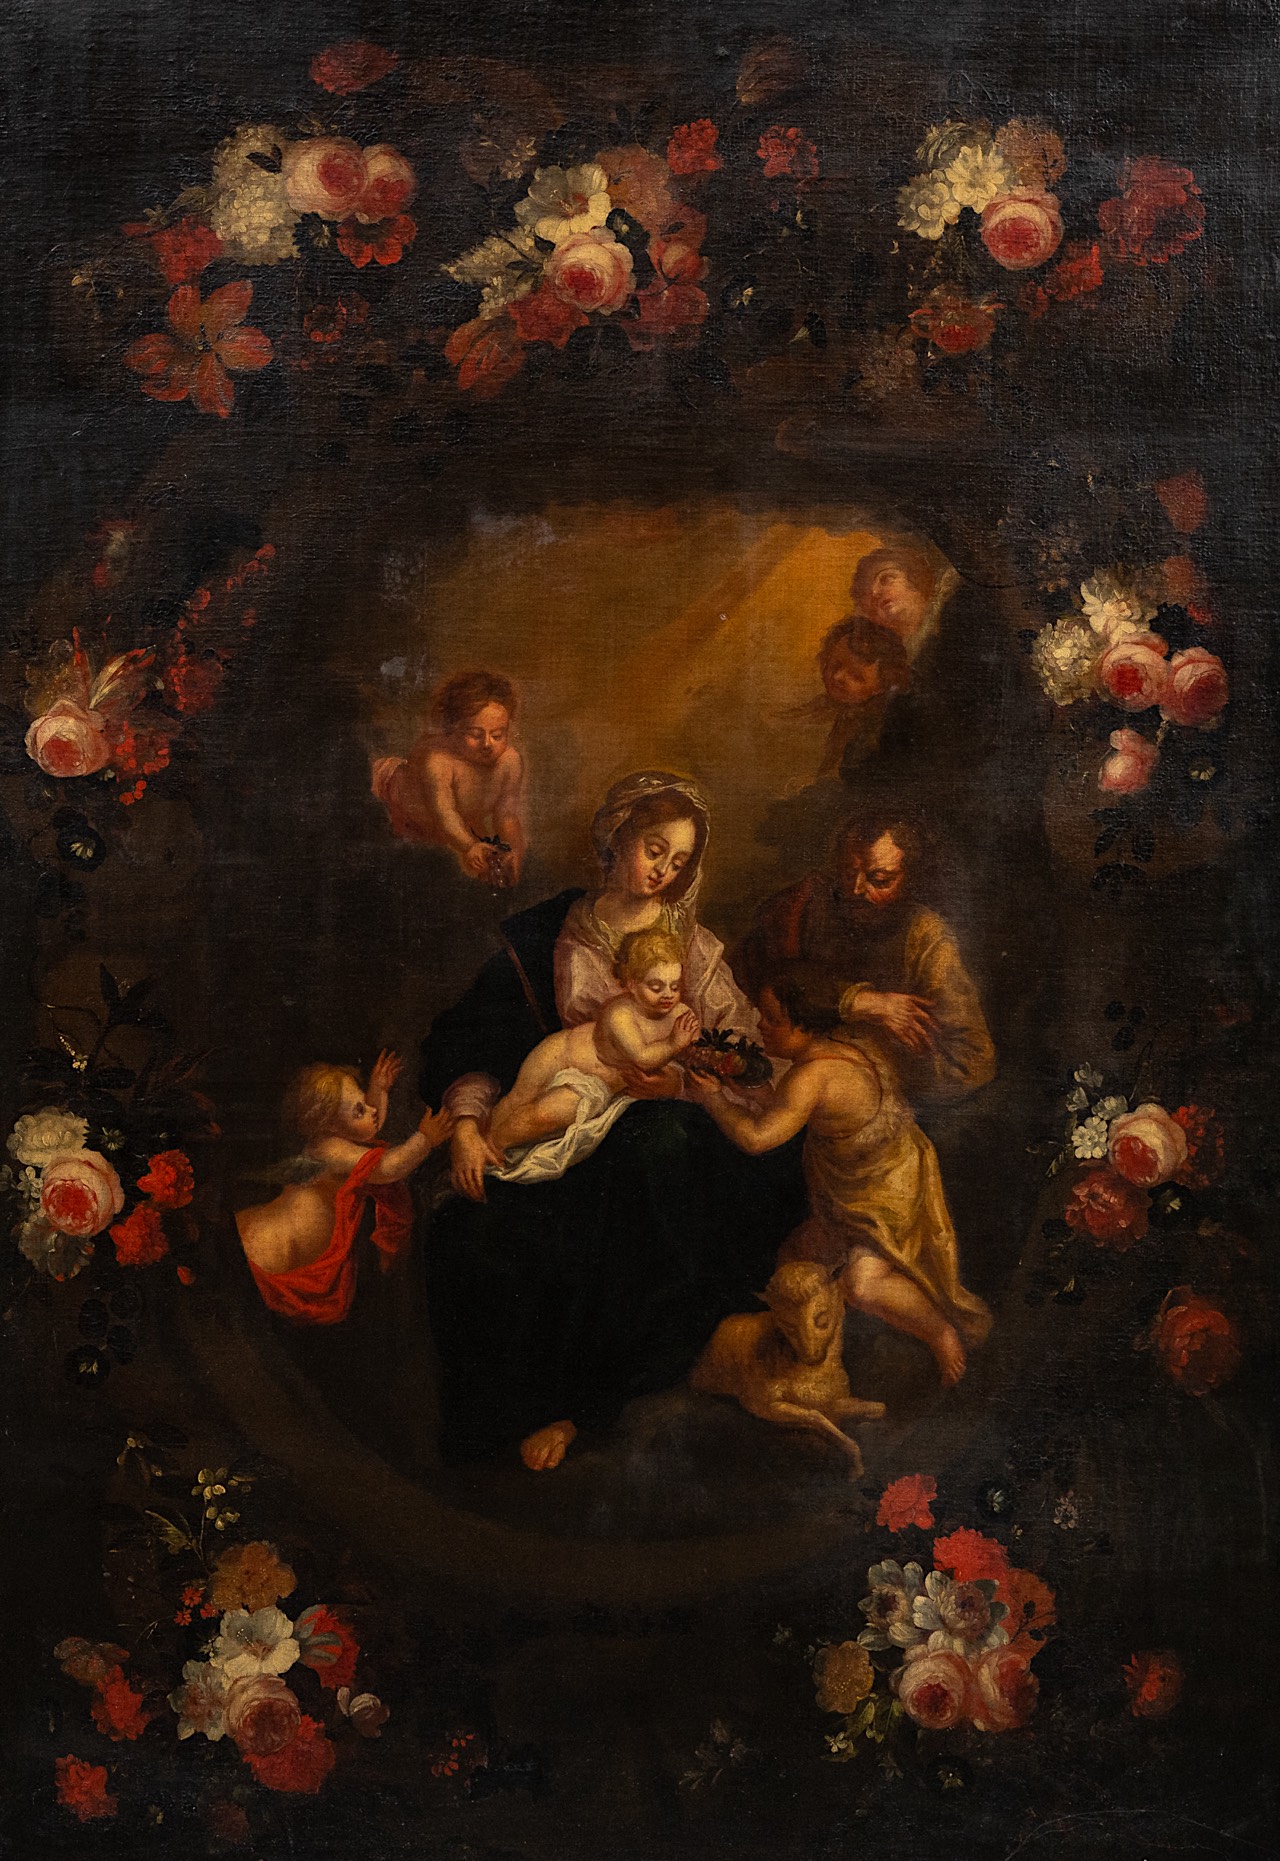 The Holy Family in a flower wreath, 17thC, Flemish School, oil on canvas 195 x 138 cm. (76.7 x 54.3